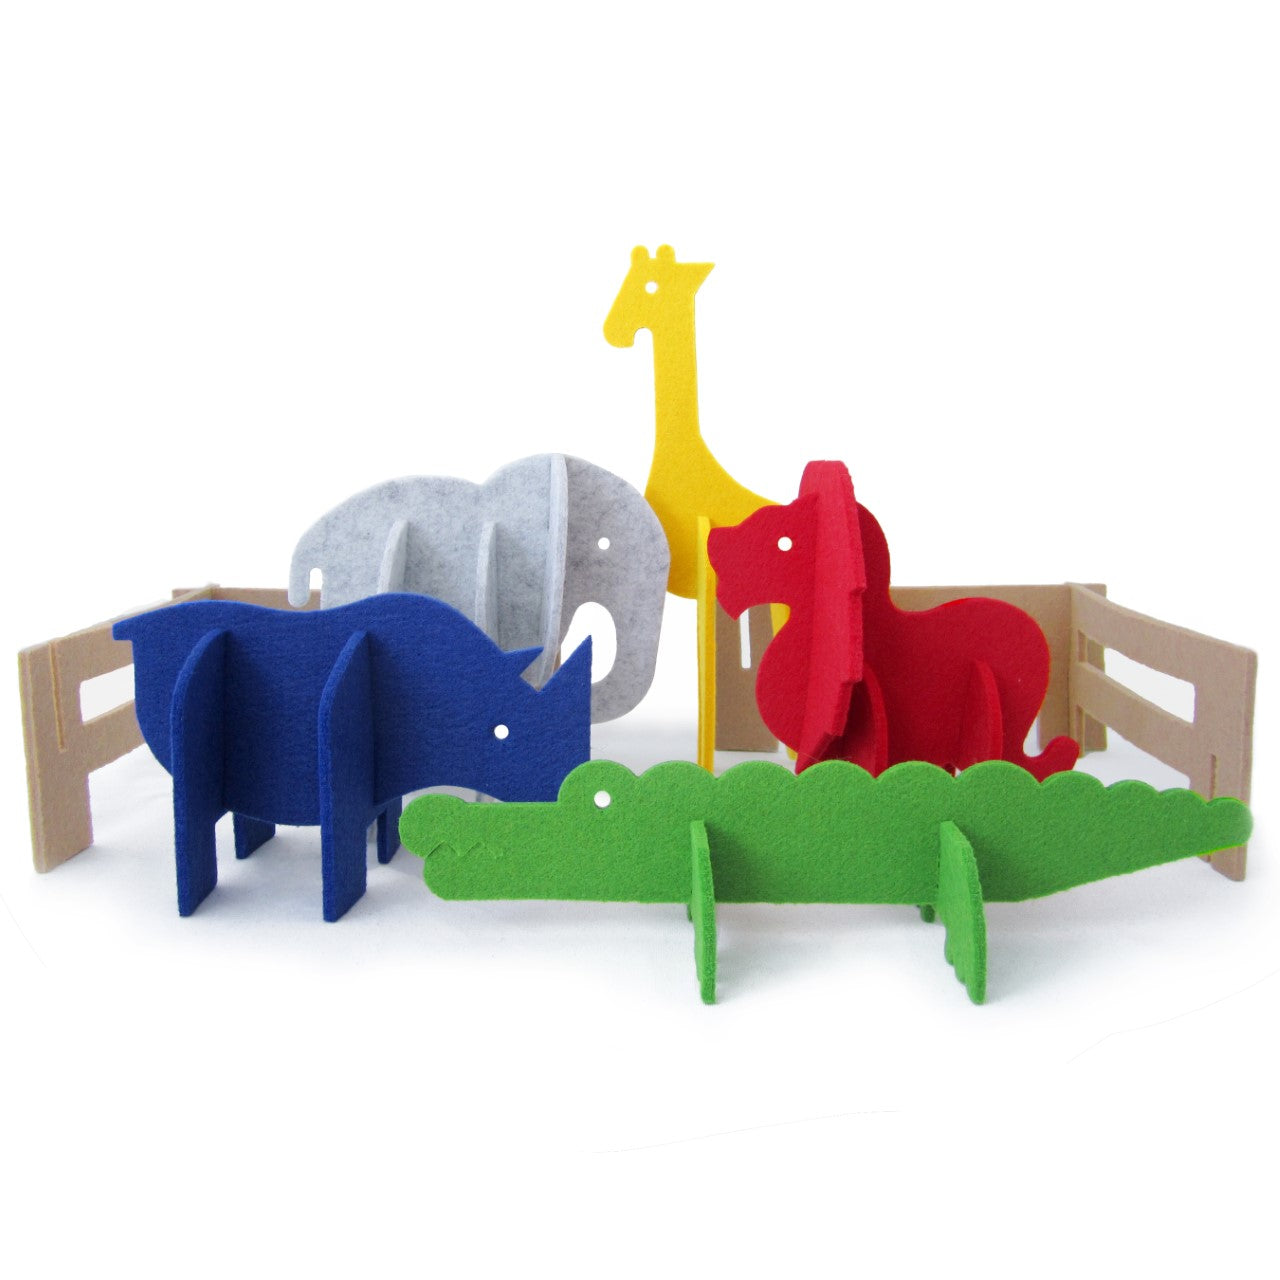 3D Zoo Animal Toddler Puzzle